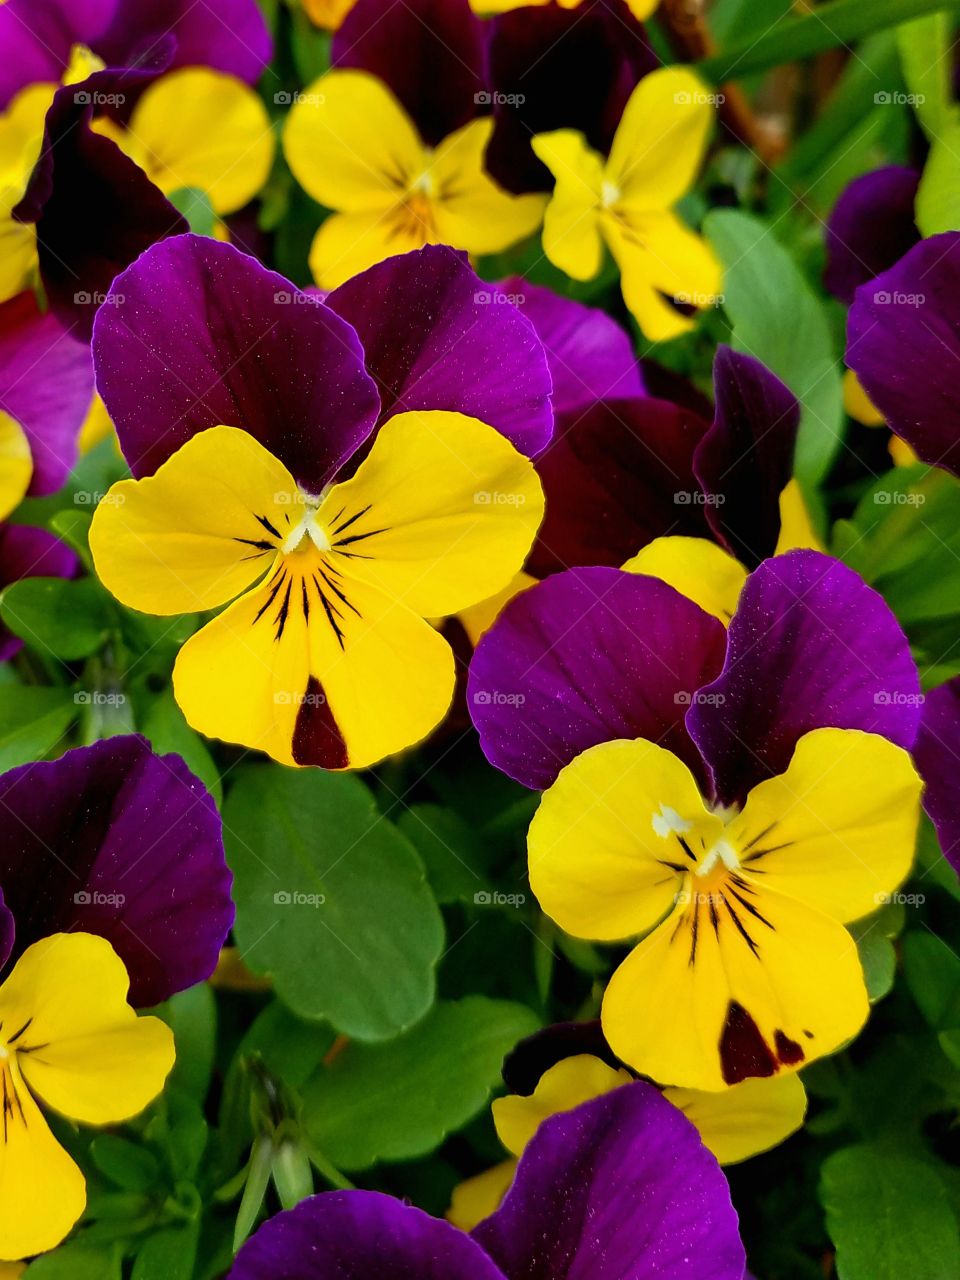 A cluster of purple and yellow pansies